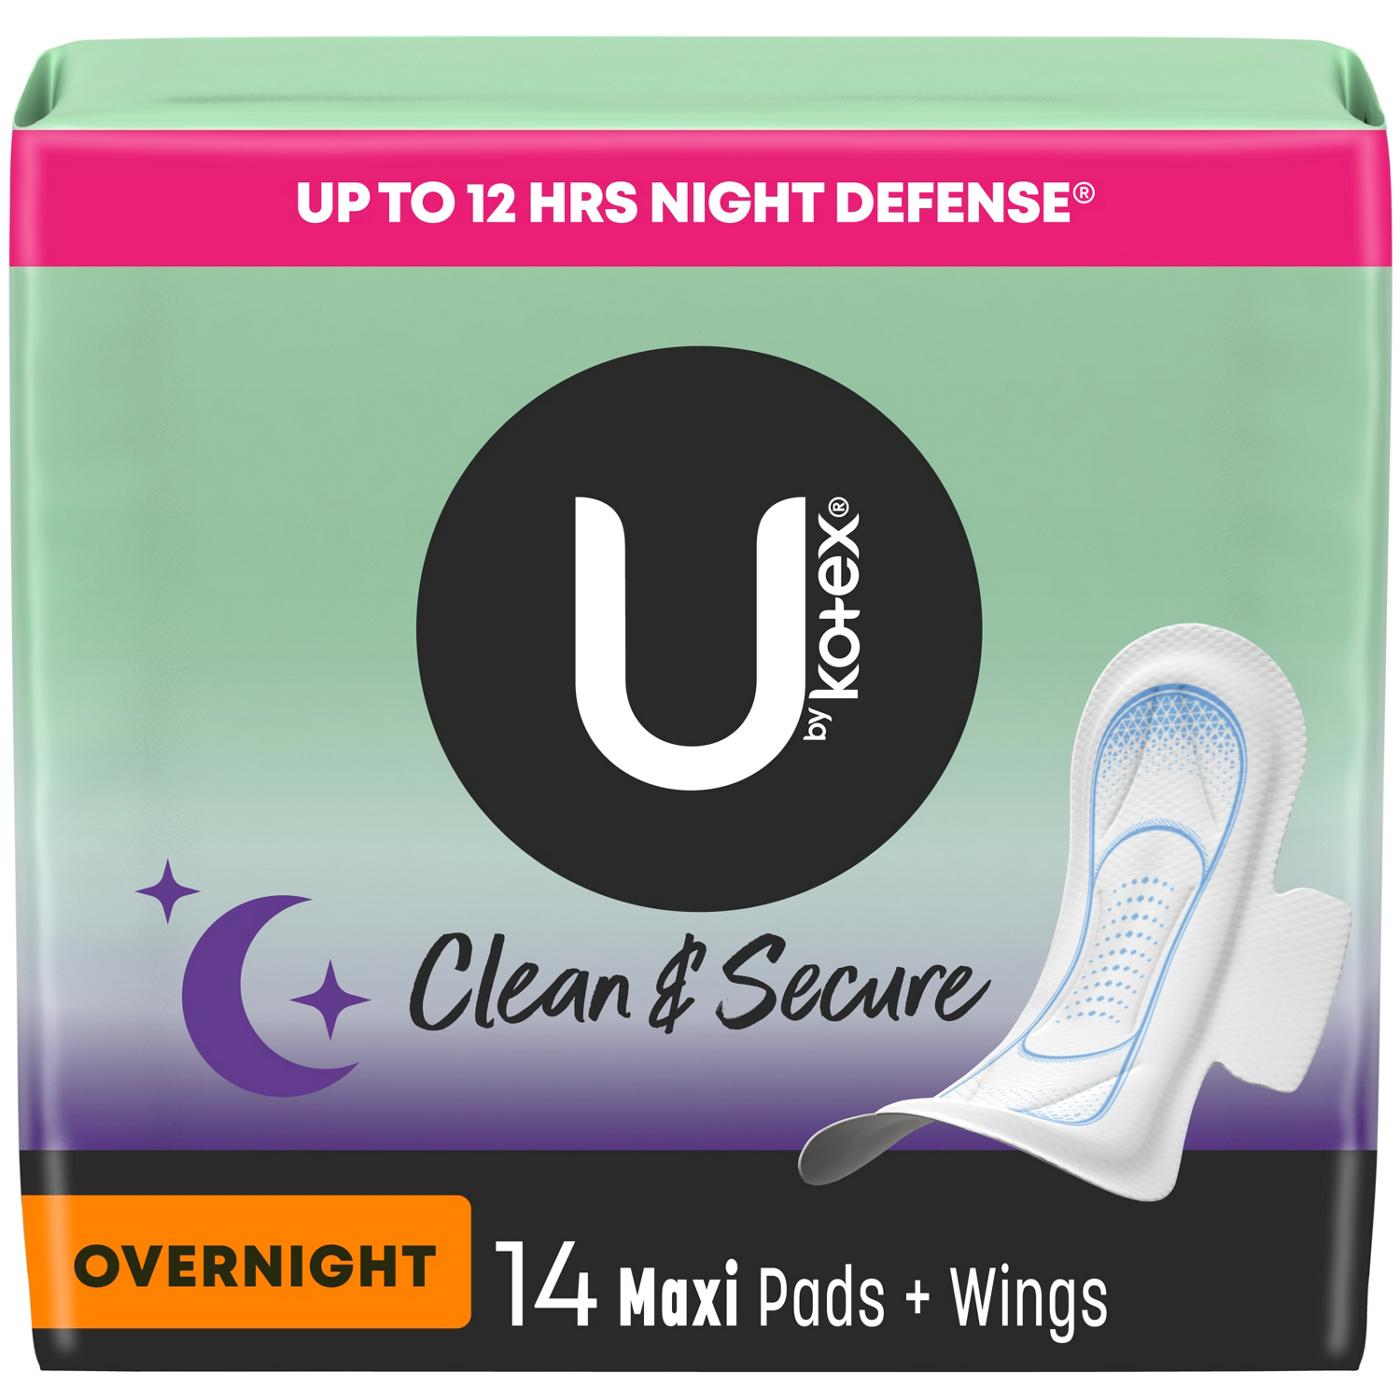 U by Kotex Clean & Secure Overnight Maxi Pads; image 1 of 8